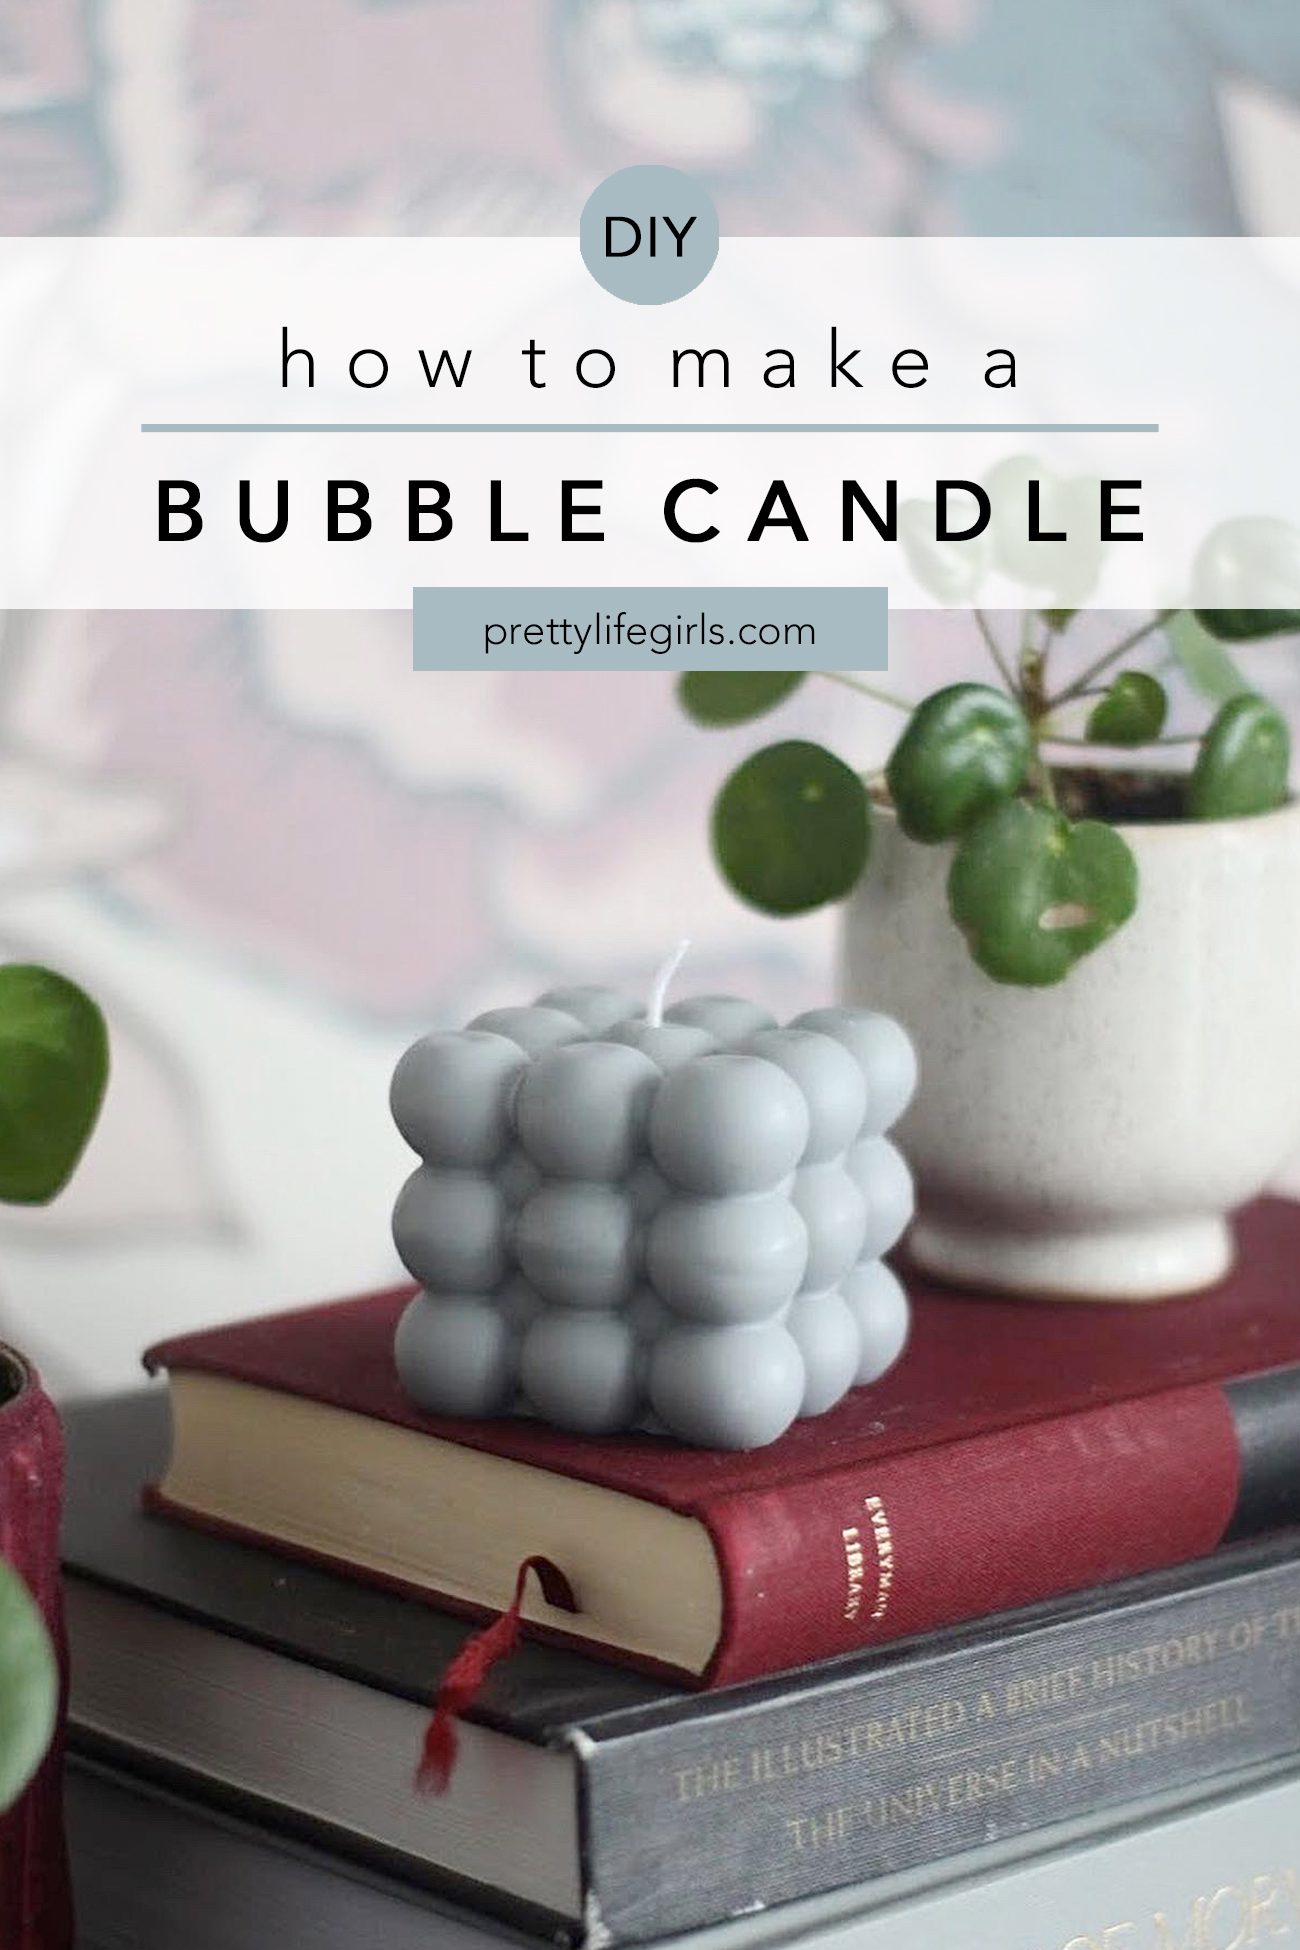 DIY Bubble Candle Tutorial + a tutorial featured by Top US Craft Blog + The Pretty Life Girls